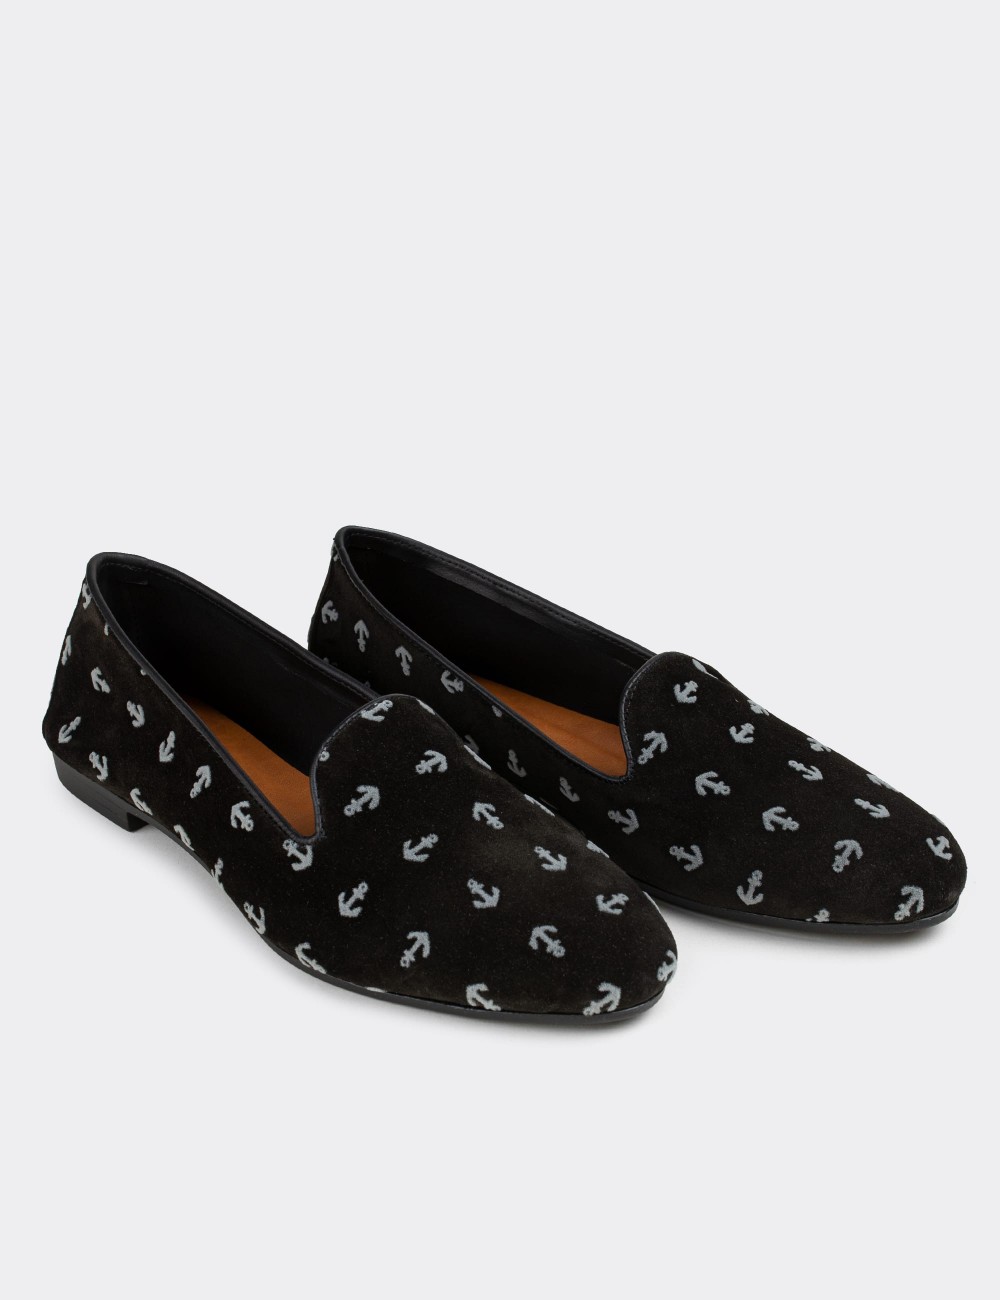 Black Suede Leather Loafers - E3208ZSYHC08